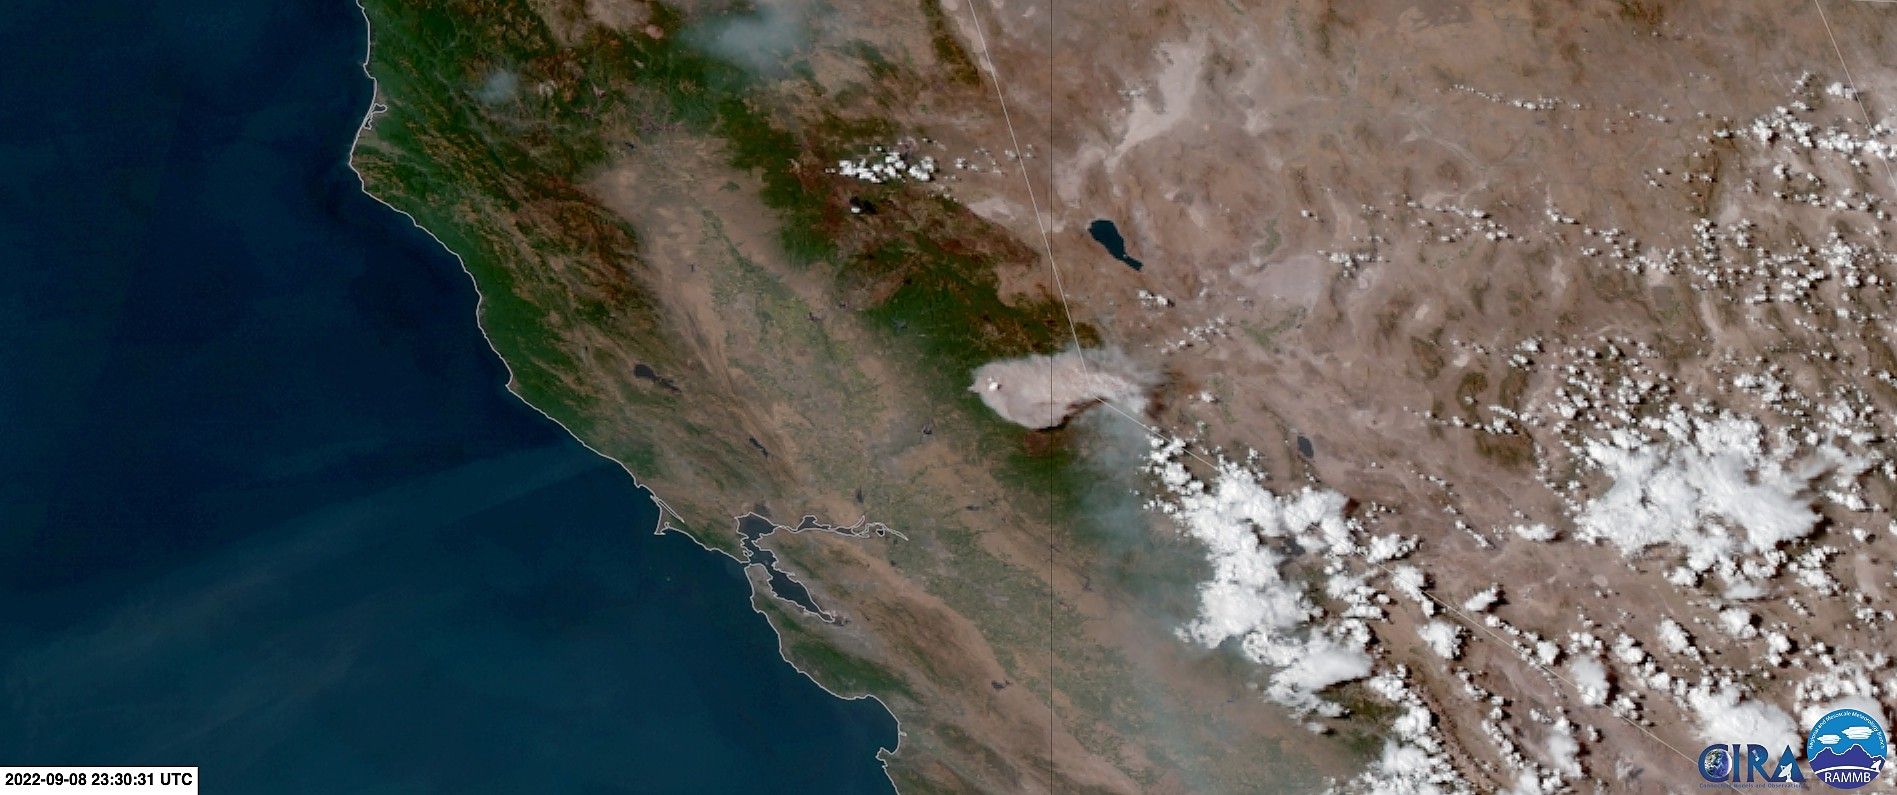 The Mosquito Fire as seen from space.